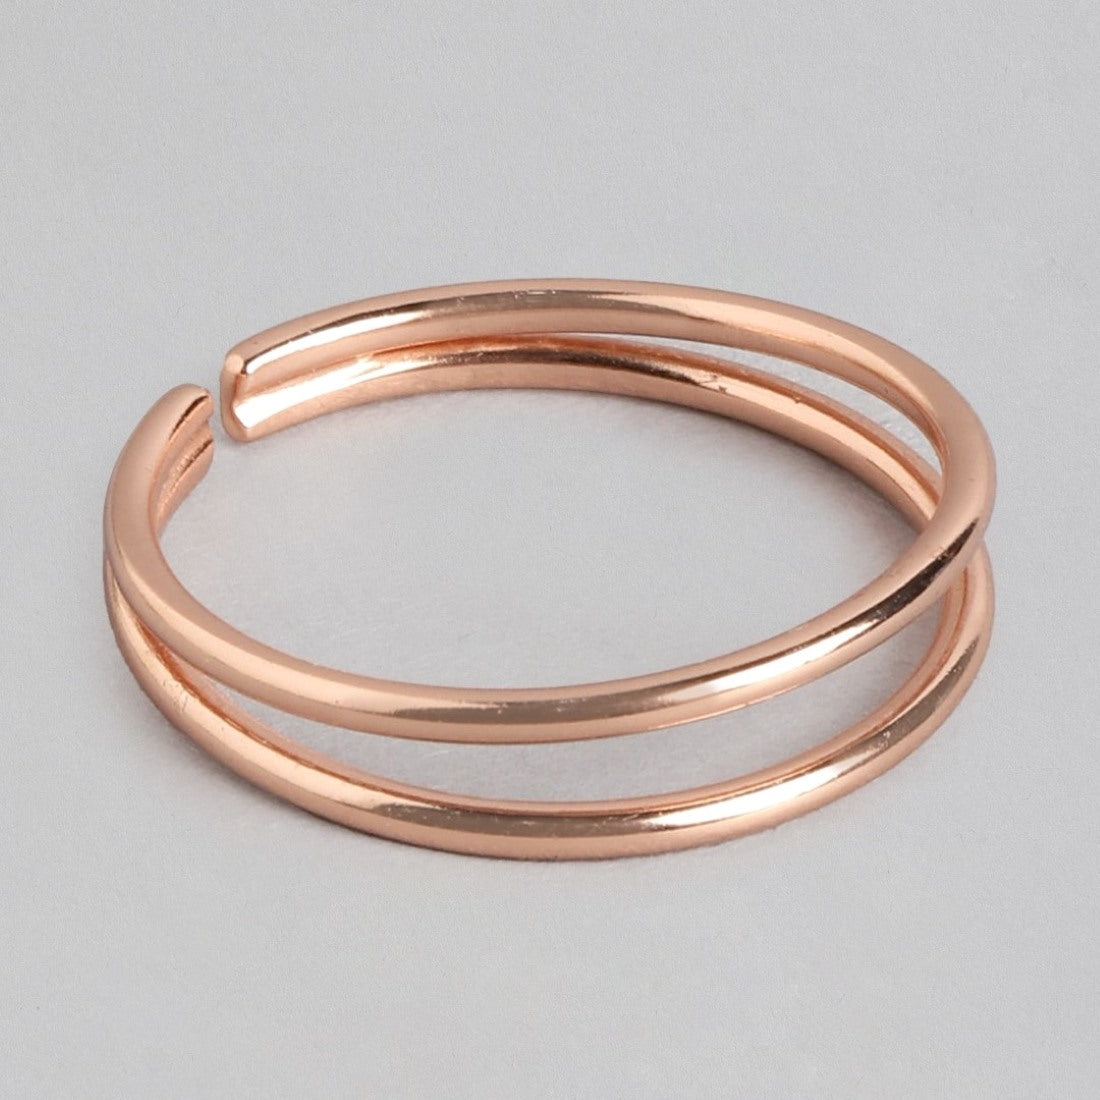 Rosy Radiance 925 Sterling Silver Rose Gold-Plated Women's Ring (Adjustable)